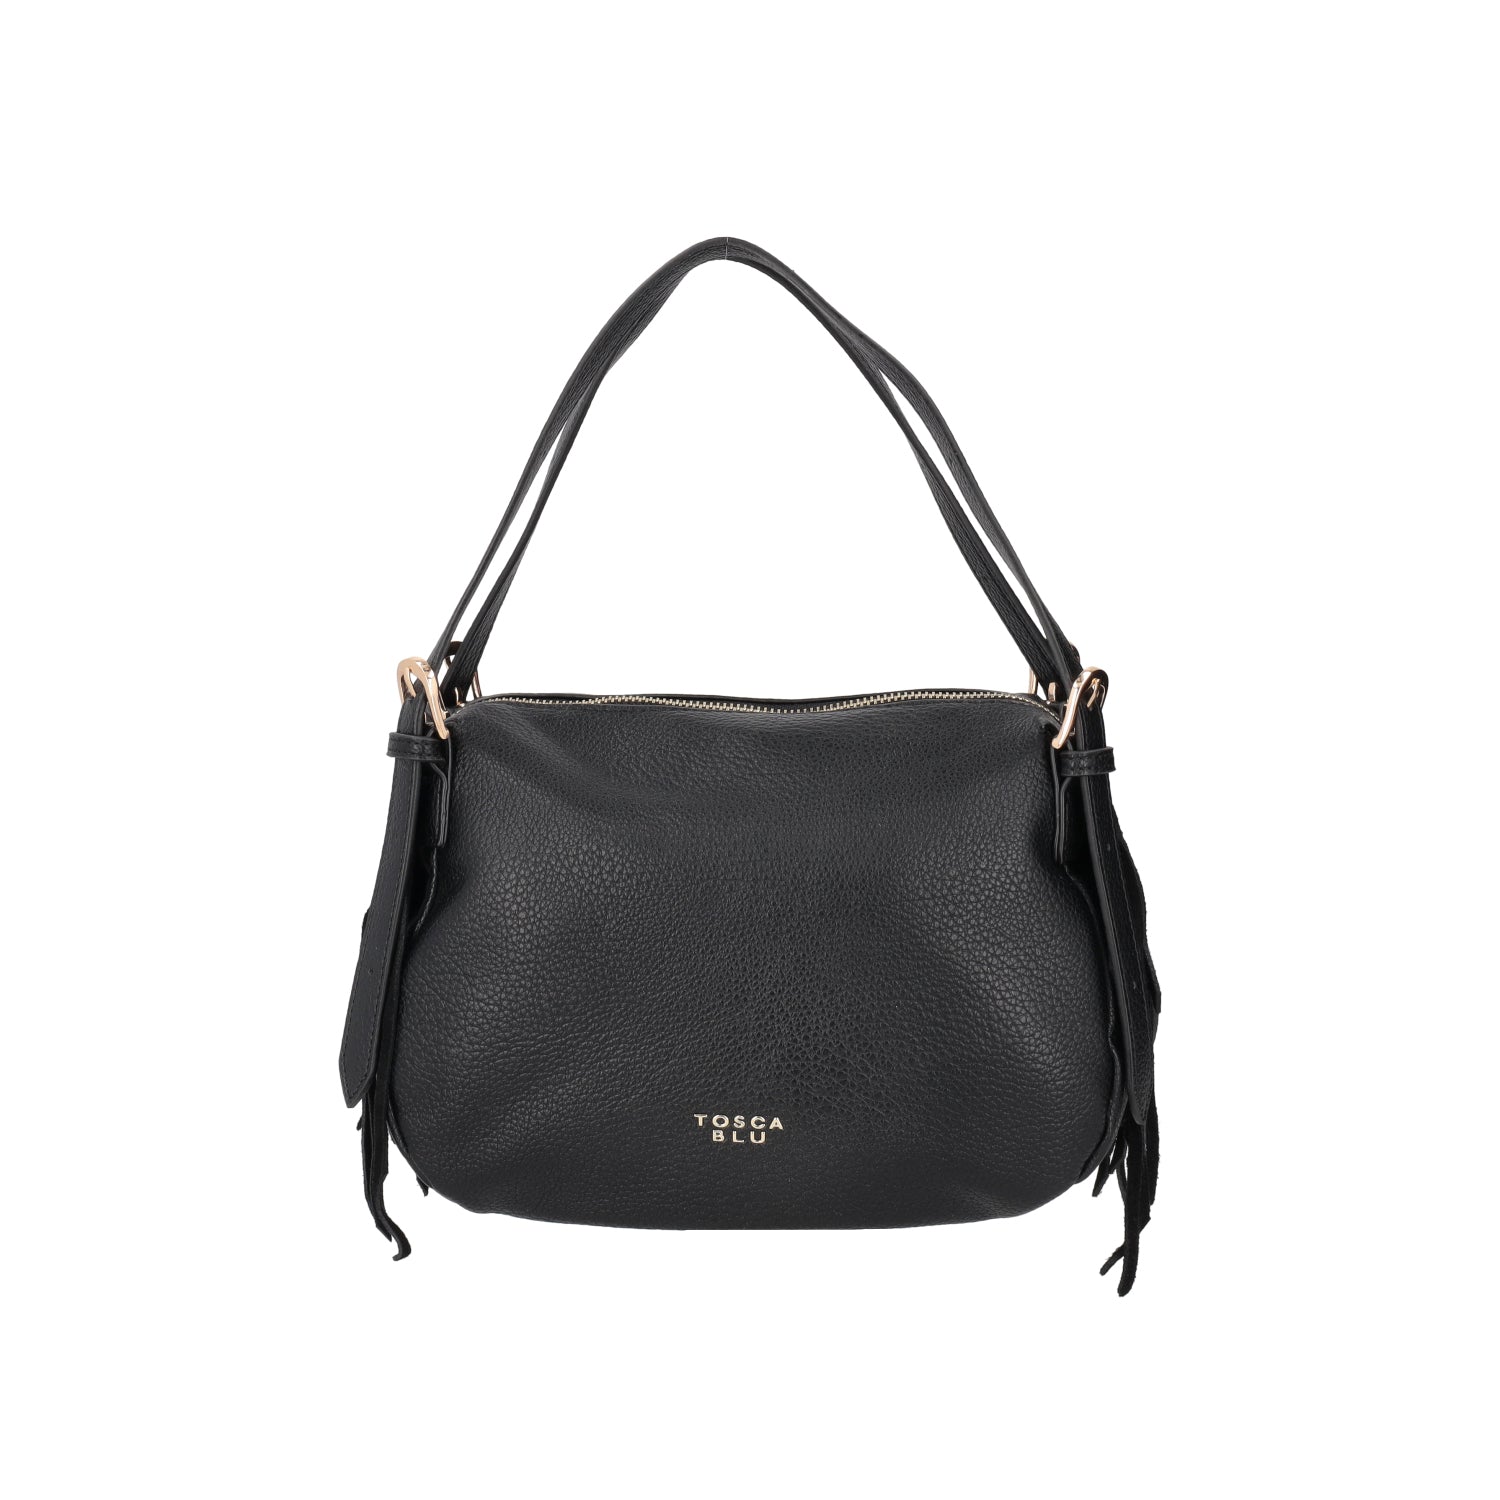 Women's bags: elegant, practical and colorful